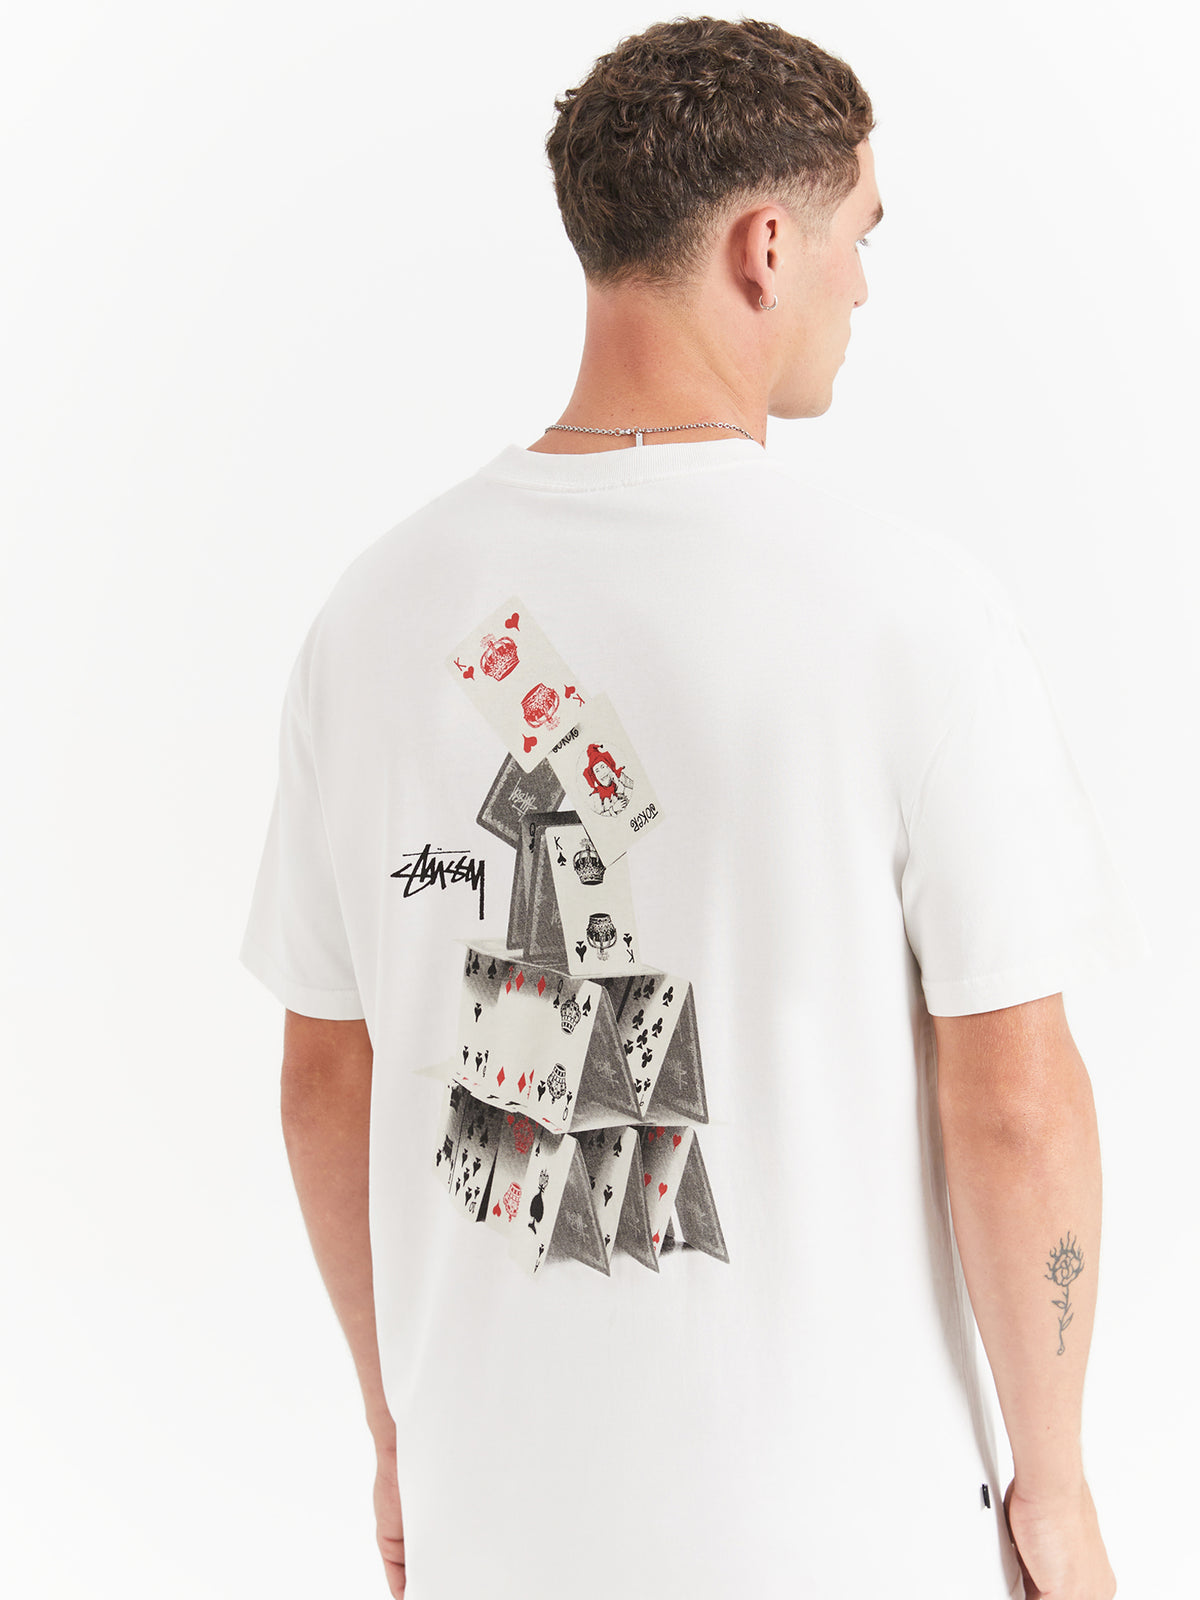 House Of Cards Heavyweight T-Shirt in Pigment White